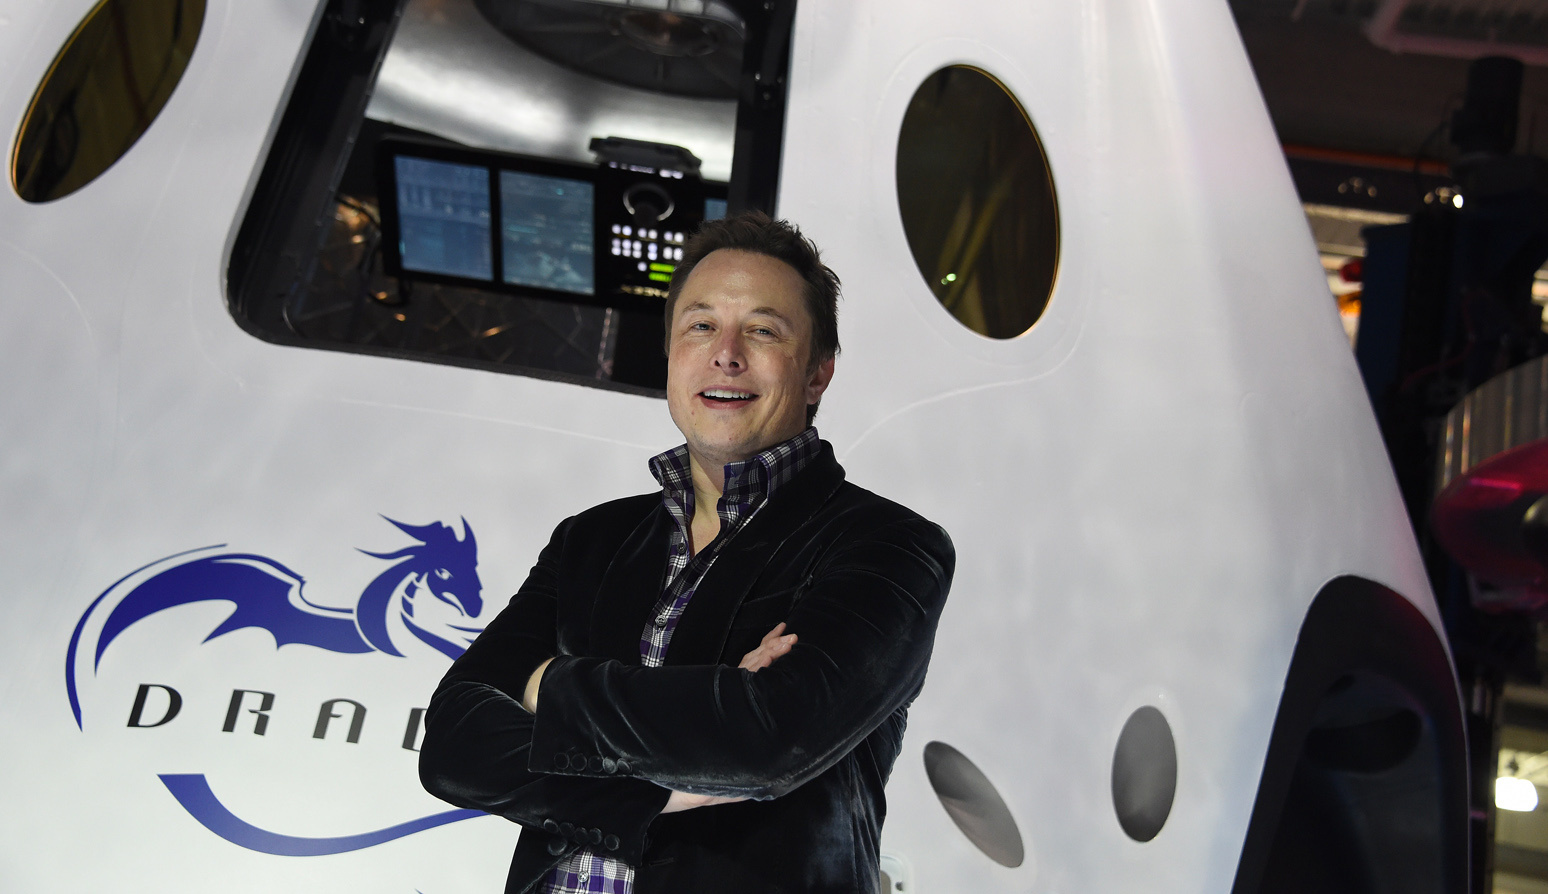 SpaceX CEO Elon Musk introduces SpaceX's Dragon V2 spacecraft, the company's next generation version of the Dragon ship designed  to carry astronauts into space, at a press conference in Hawthorne, Calif. on May 29, 2014. (Robyn Beck—AFP/Getty Images)